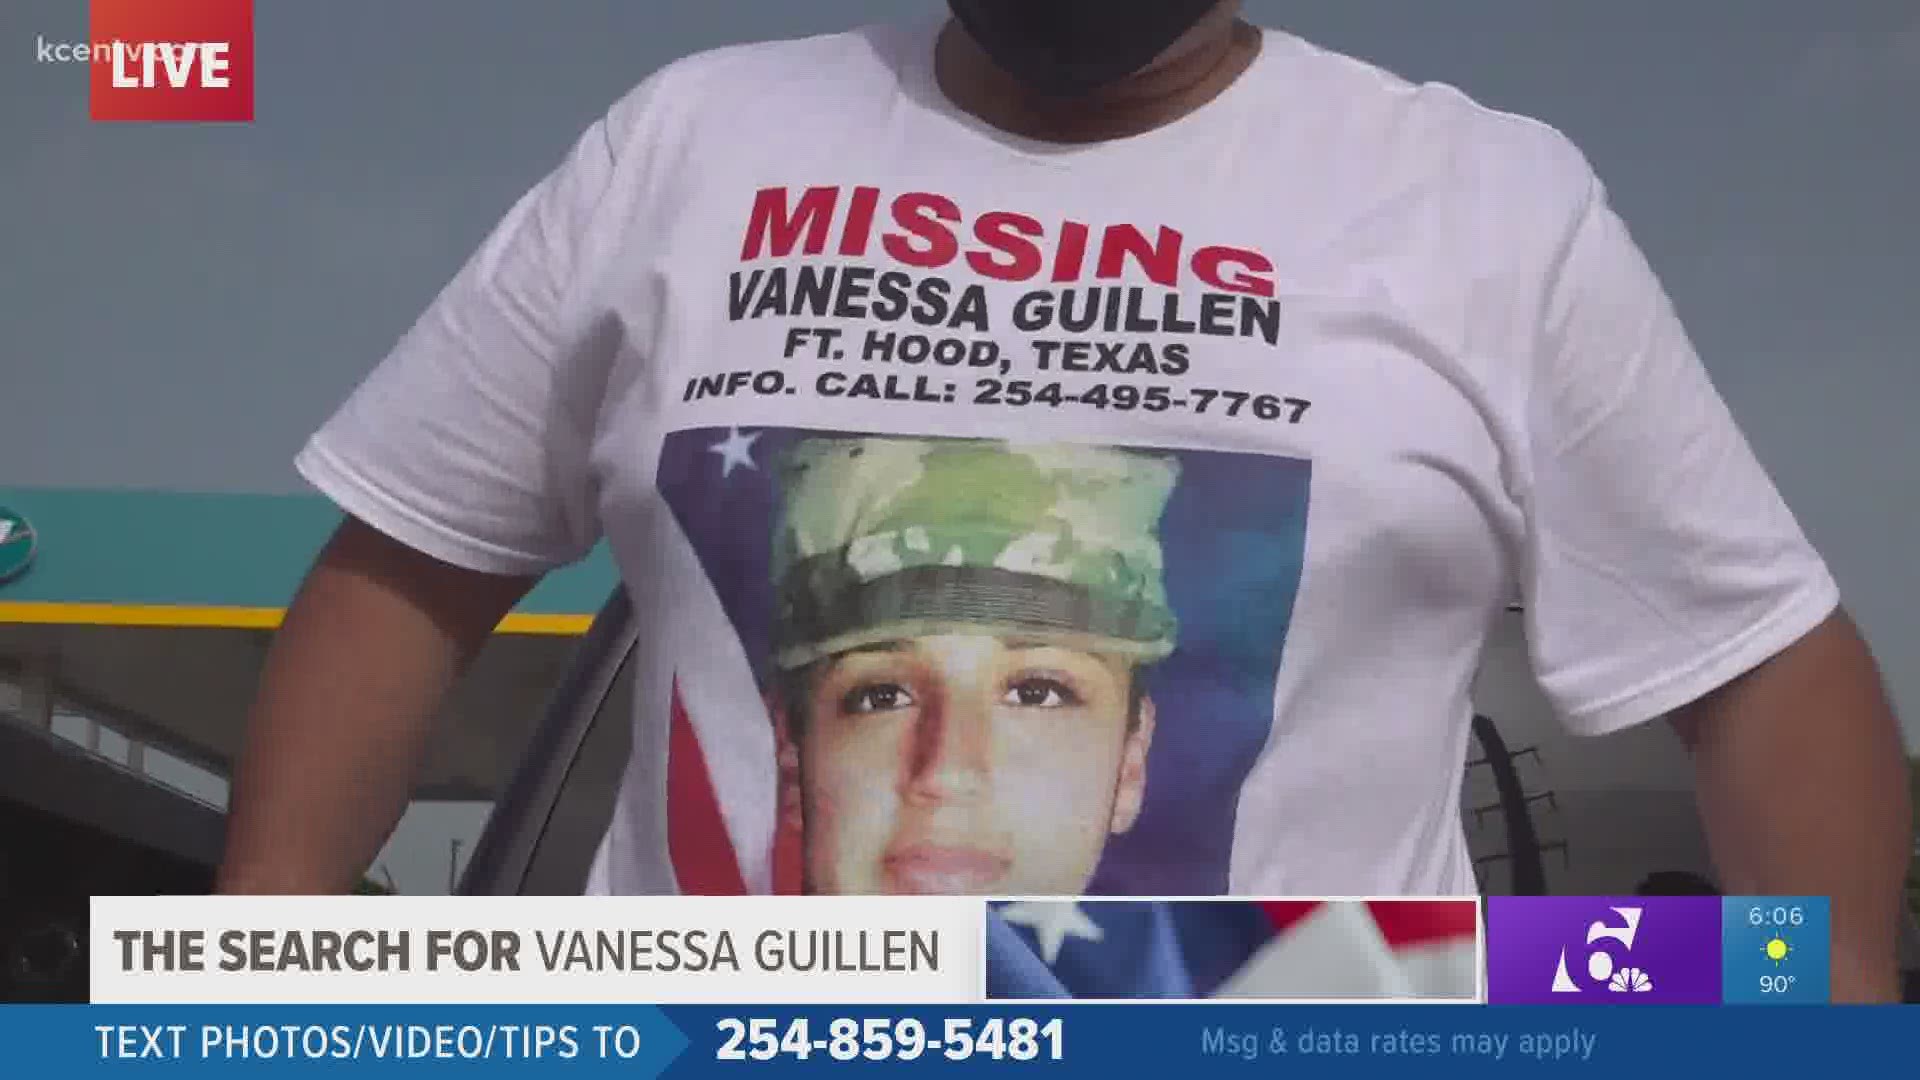 Bianca and Fernando Chavez, the owners of CC Custom Designs out of Pflugerville donated 150 shirts to help the family of missing Fort Hood soldier Vanessa Guillen.